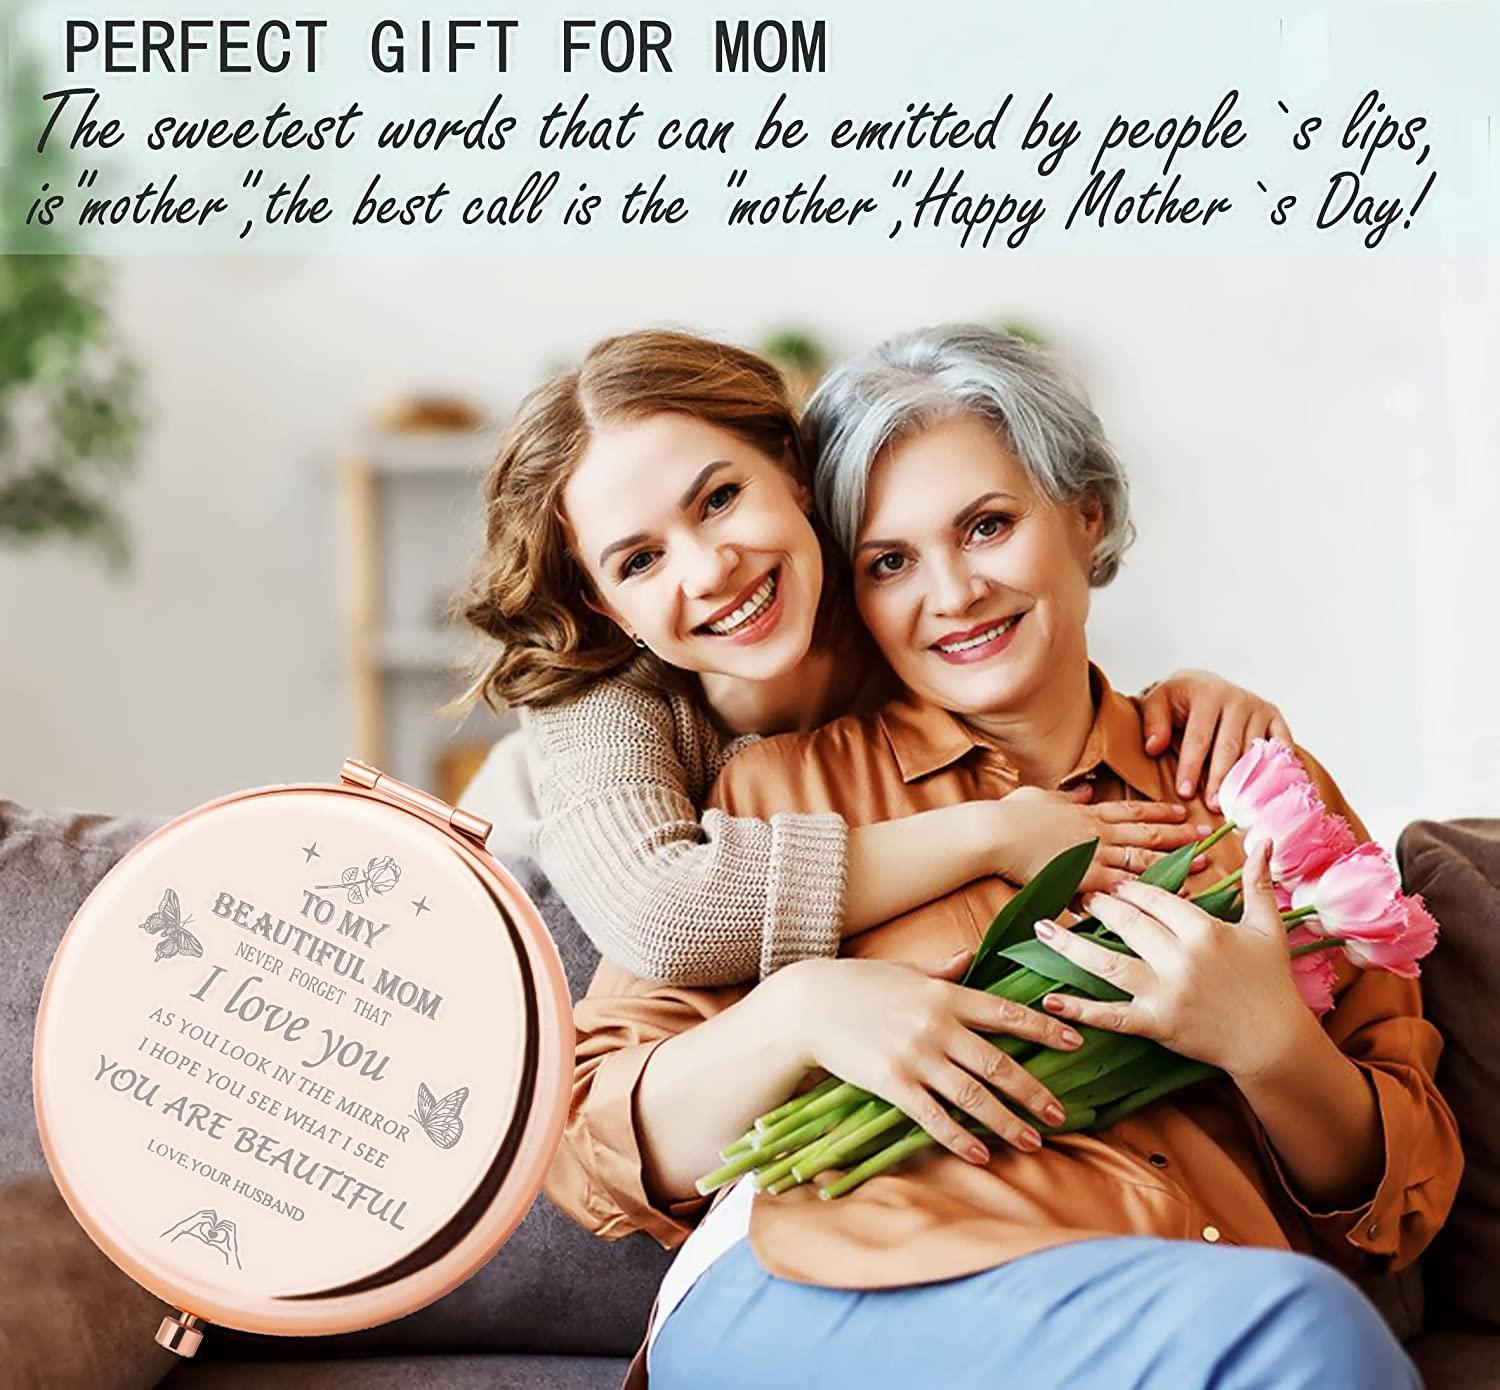 Buy Gifts For Mom - Best Gifts For Mom From Daughter Or Son. Includes: Set  Of 6 Bath Bombs, Ring Holders For Jewelry, Best Mom Coffee Mug, Warm Socks  And Women Scarf.